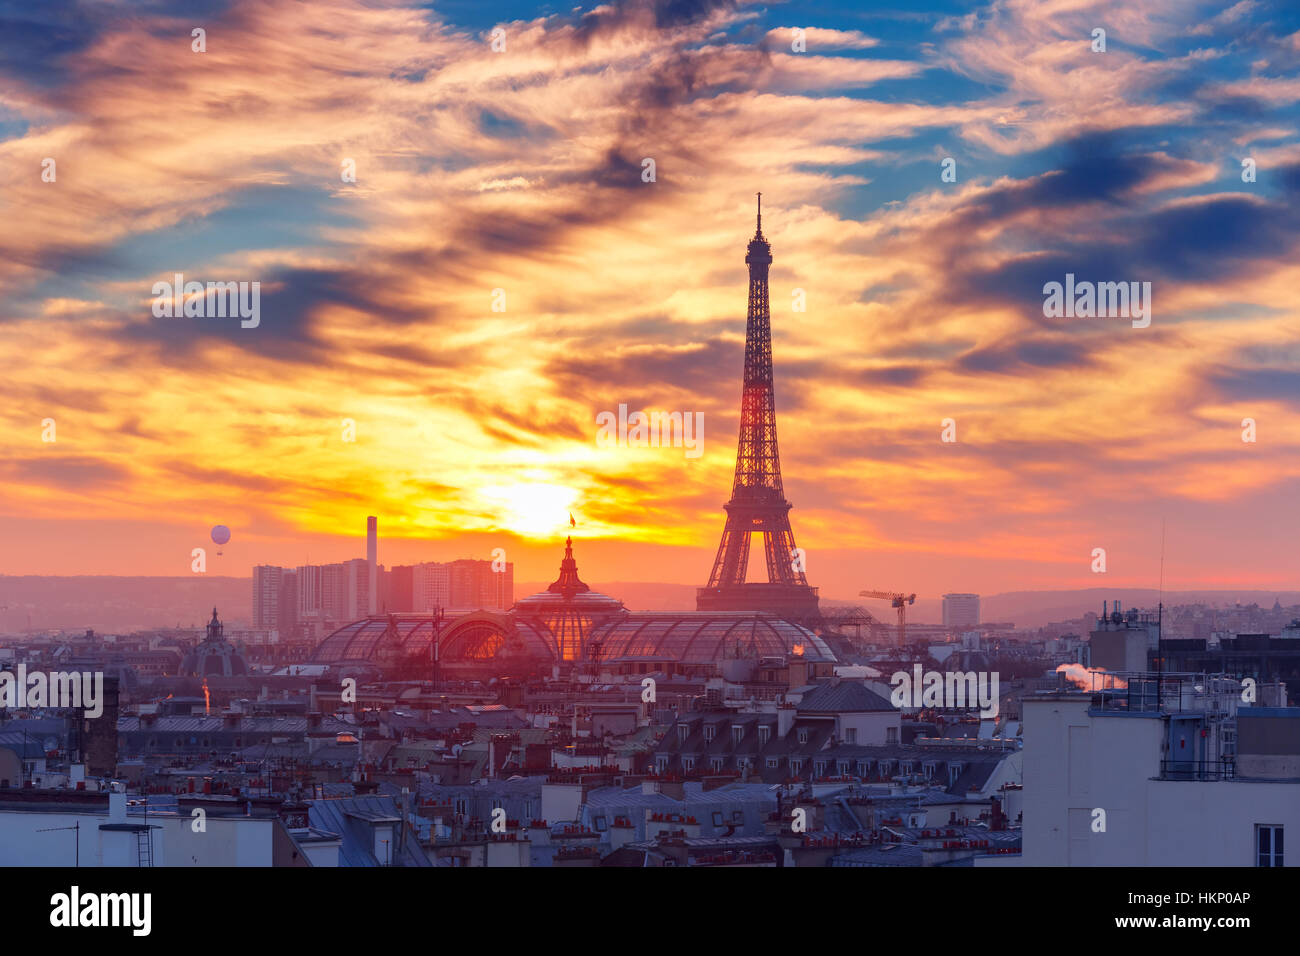 Eiffel Tower at sunset in Paris, France Stock Photo